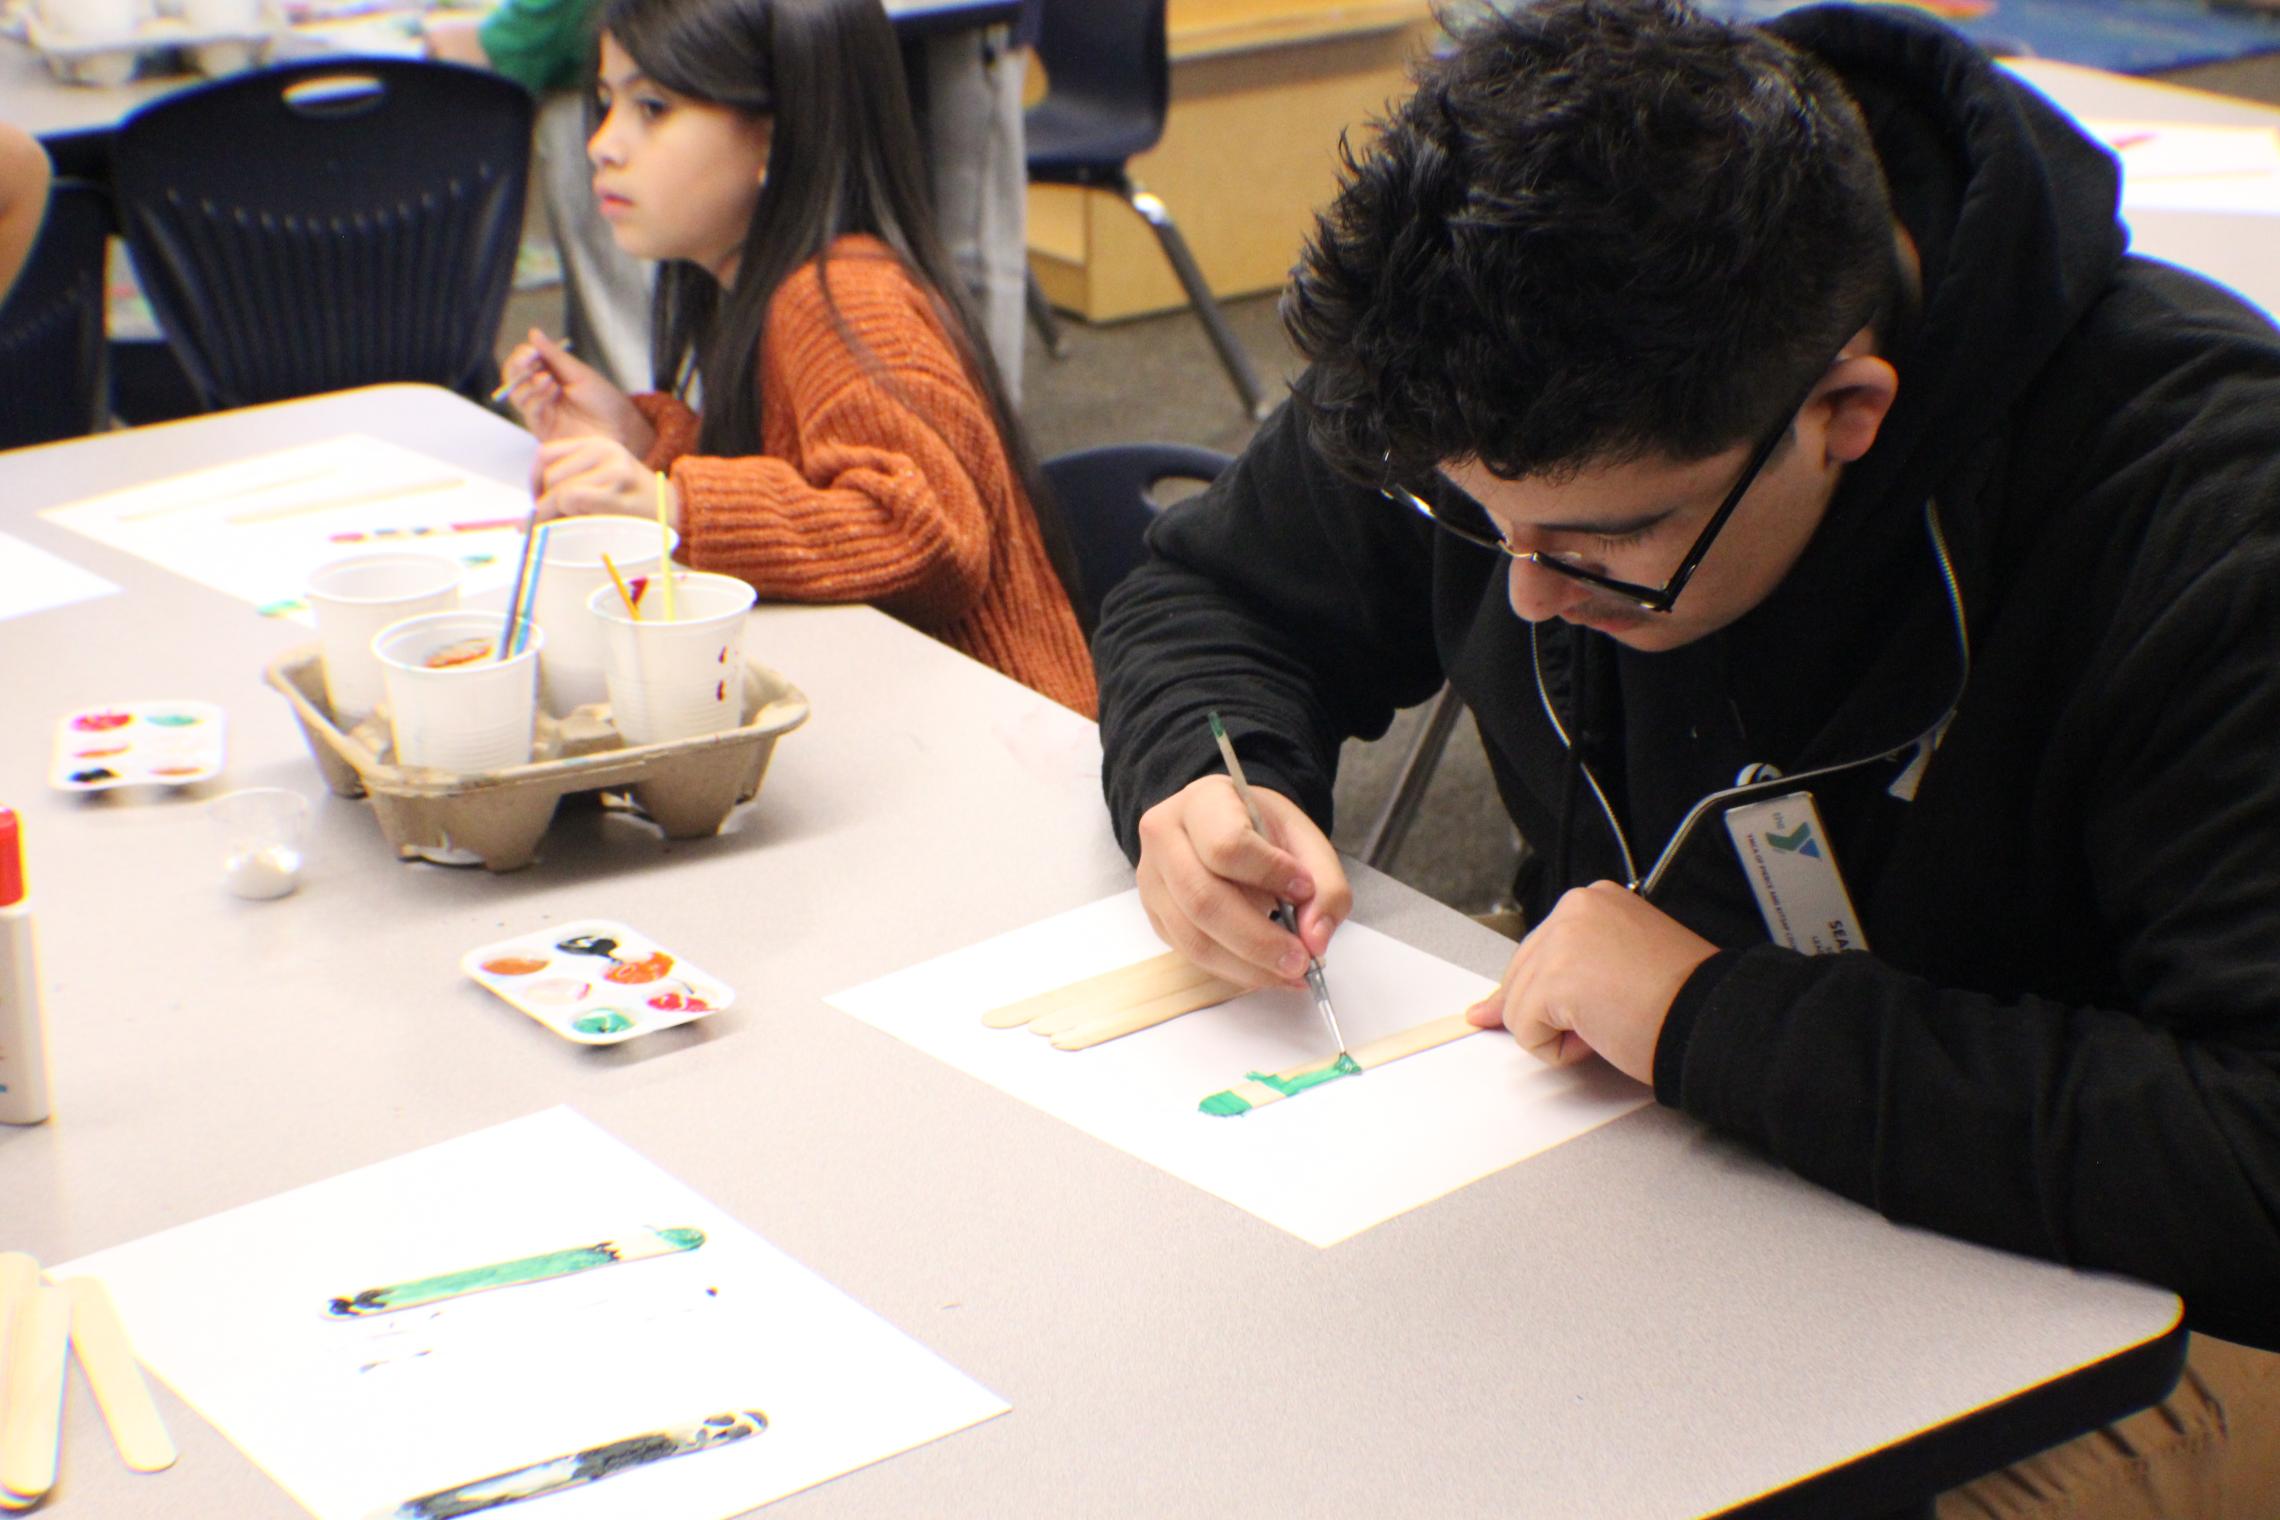 Site Leader Sean Chavez 18, working on an art project with the After School Care participants   